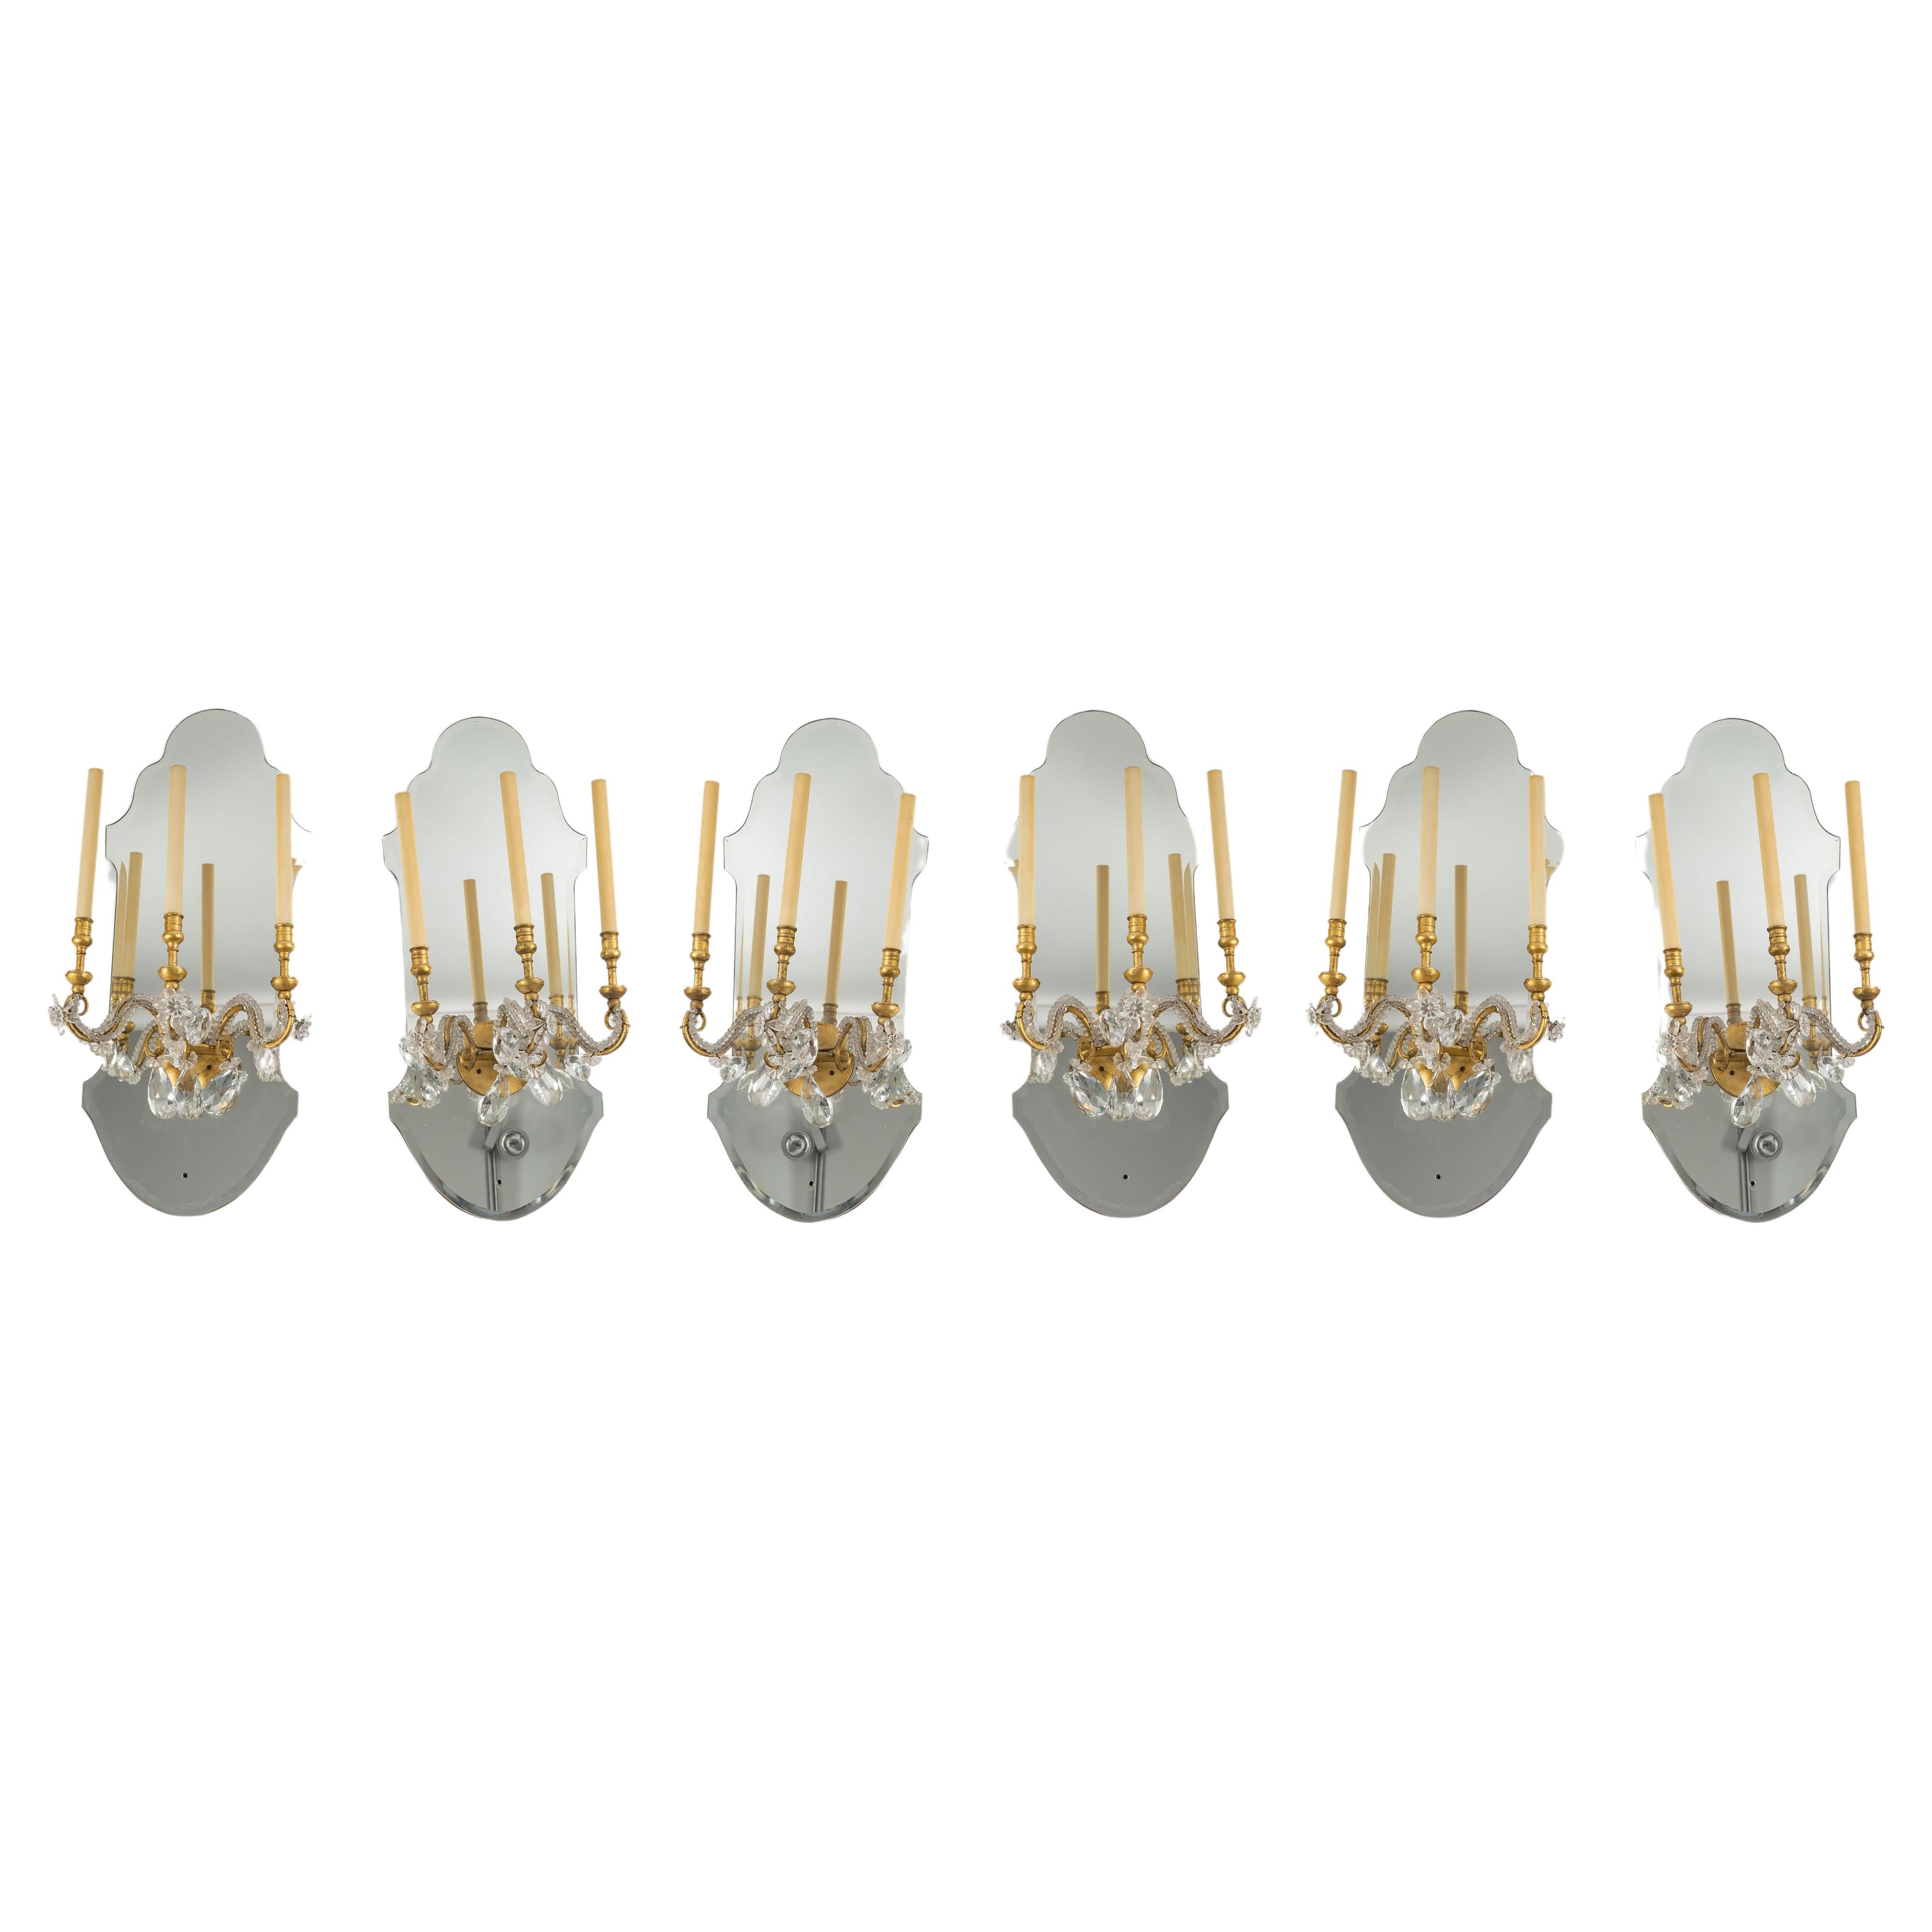 Suite of 6 Gilded Iron and Mirror Sconces with Glass Drops, 1950-1960. For Sale